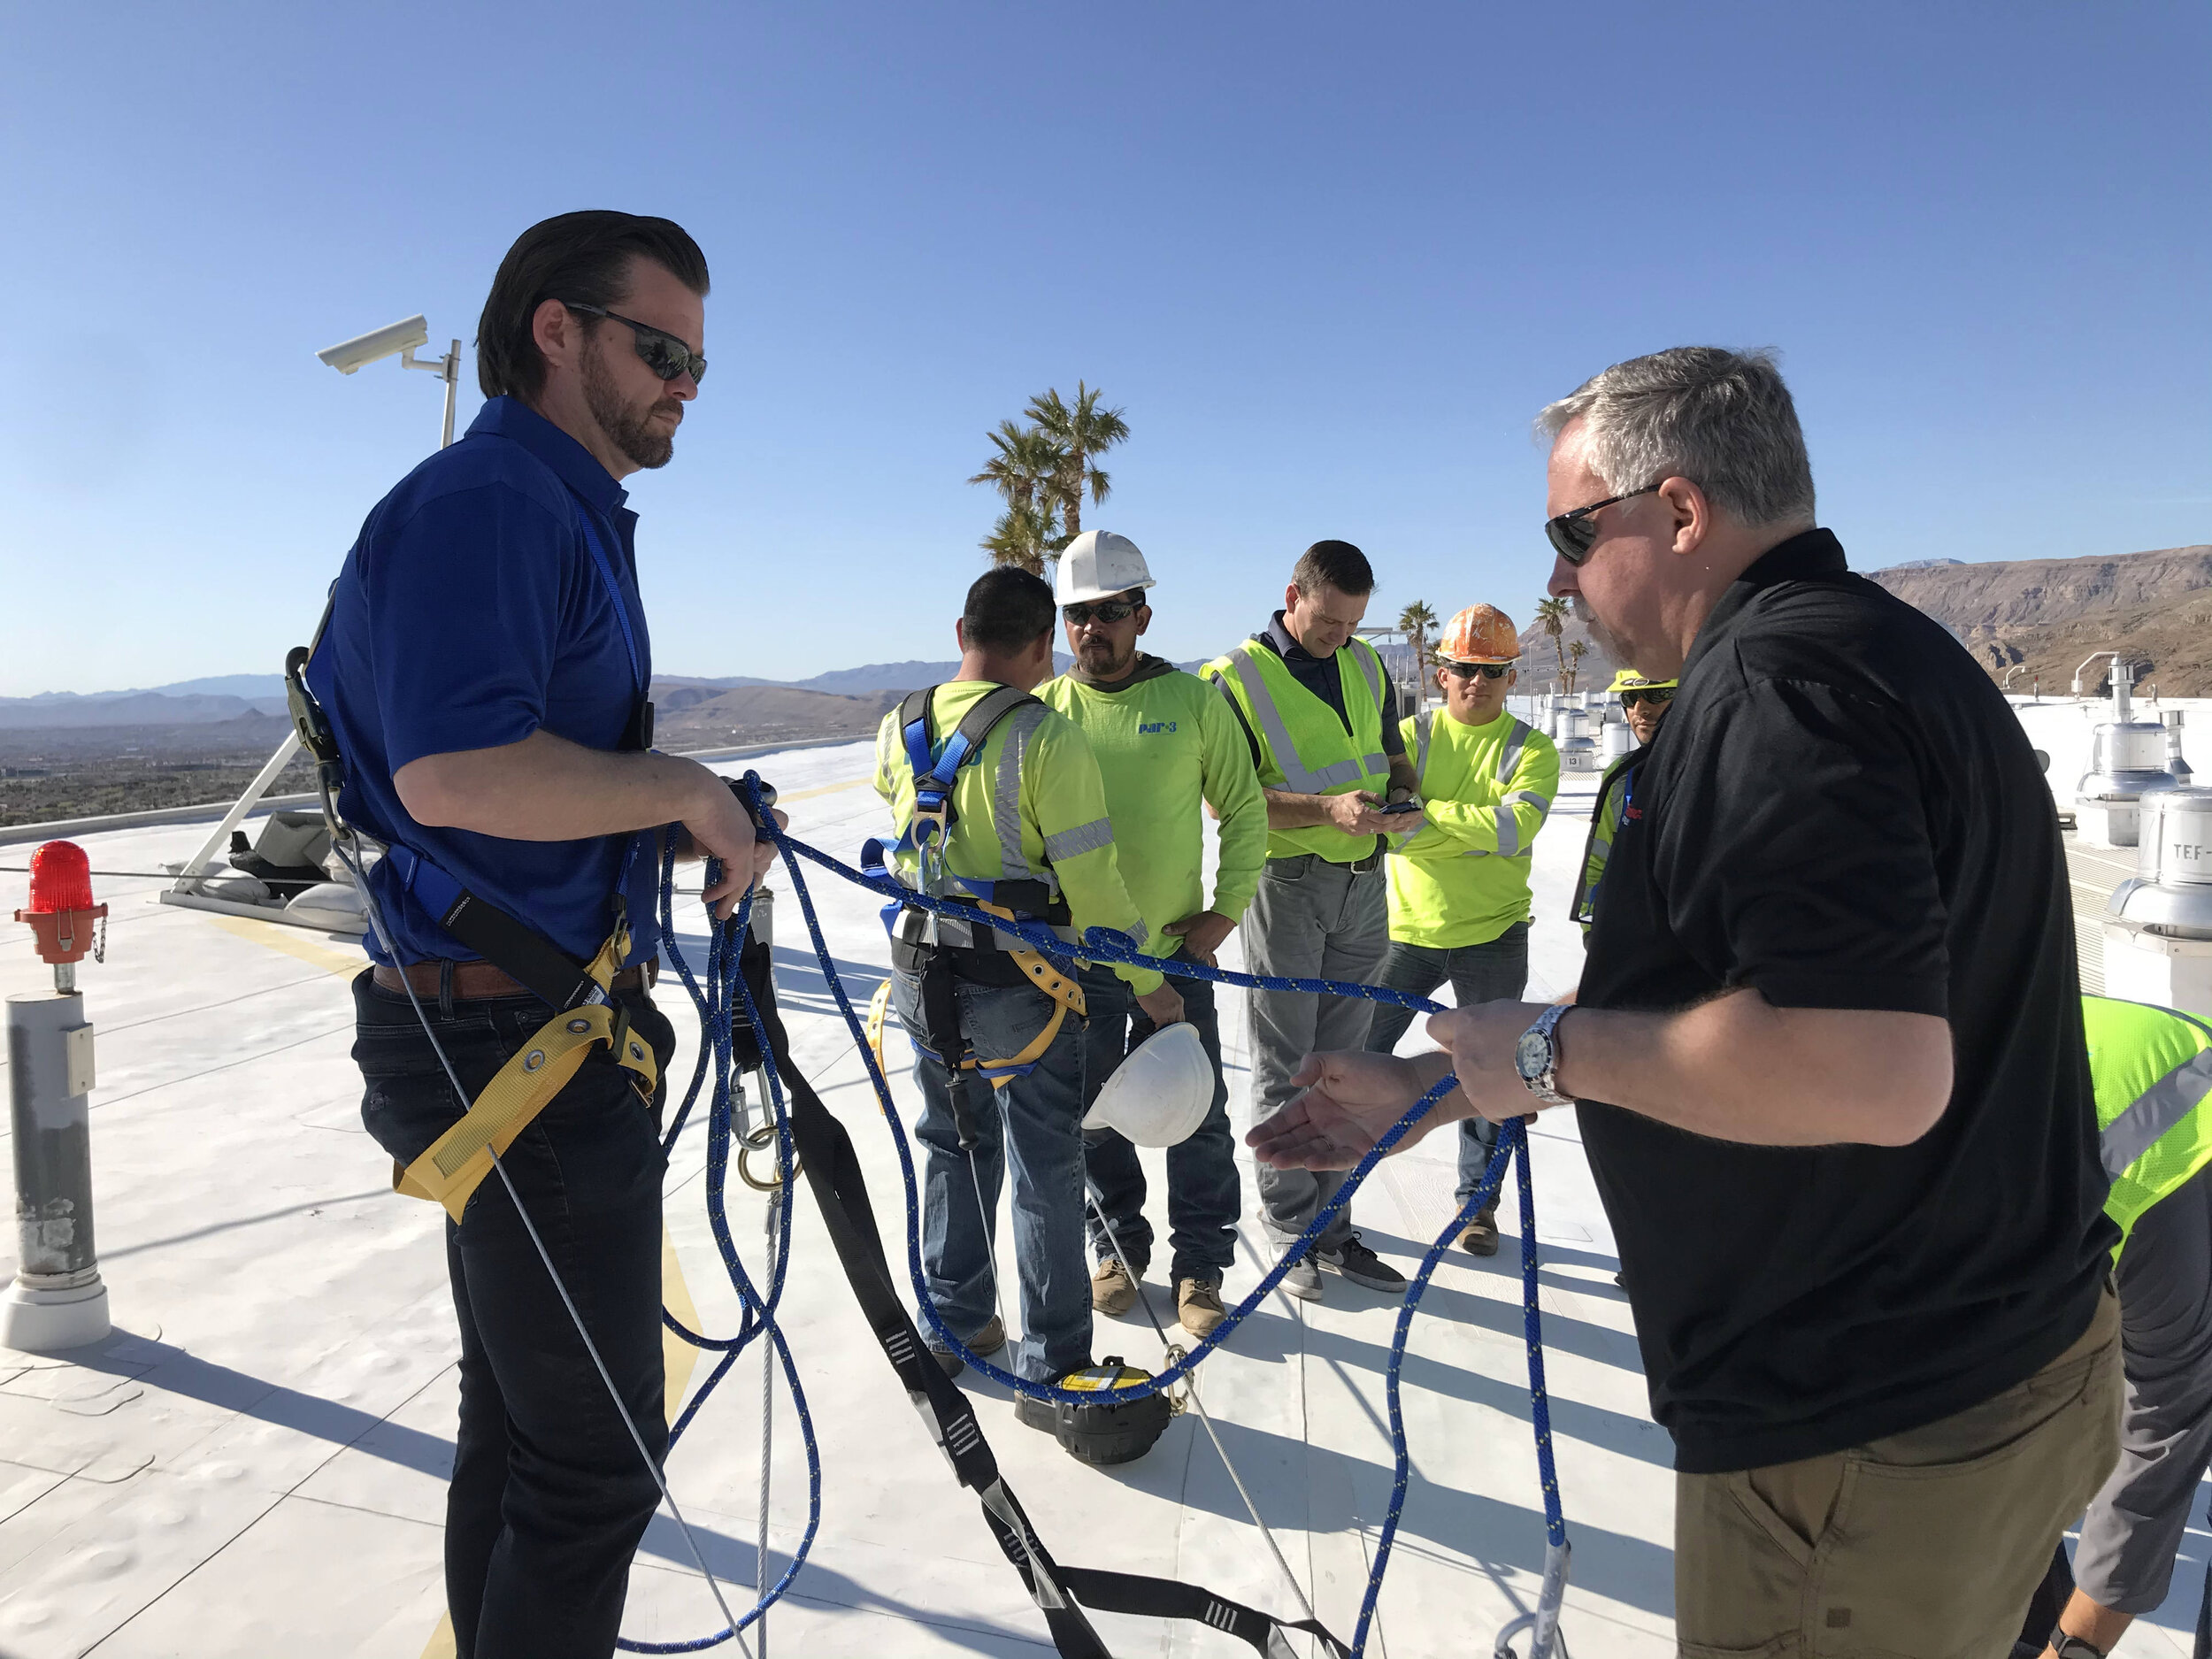 Fall Protection Safety Training with PAR 3 Landscapers